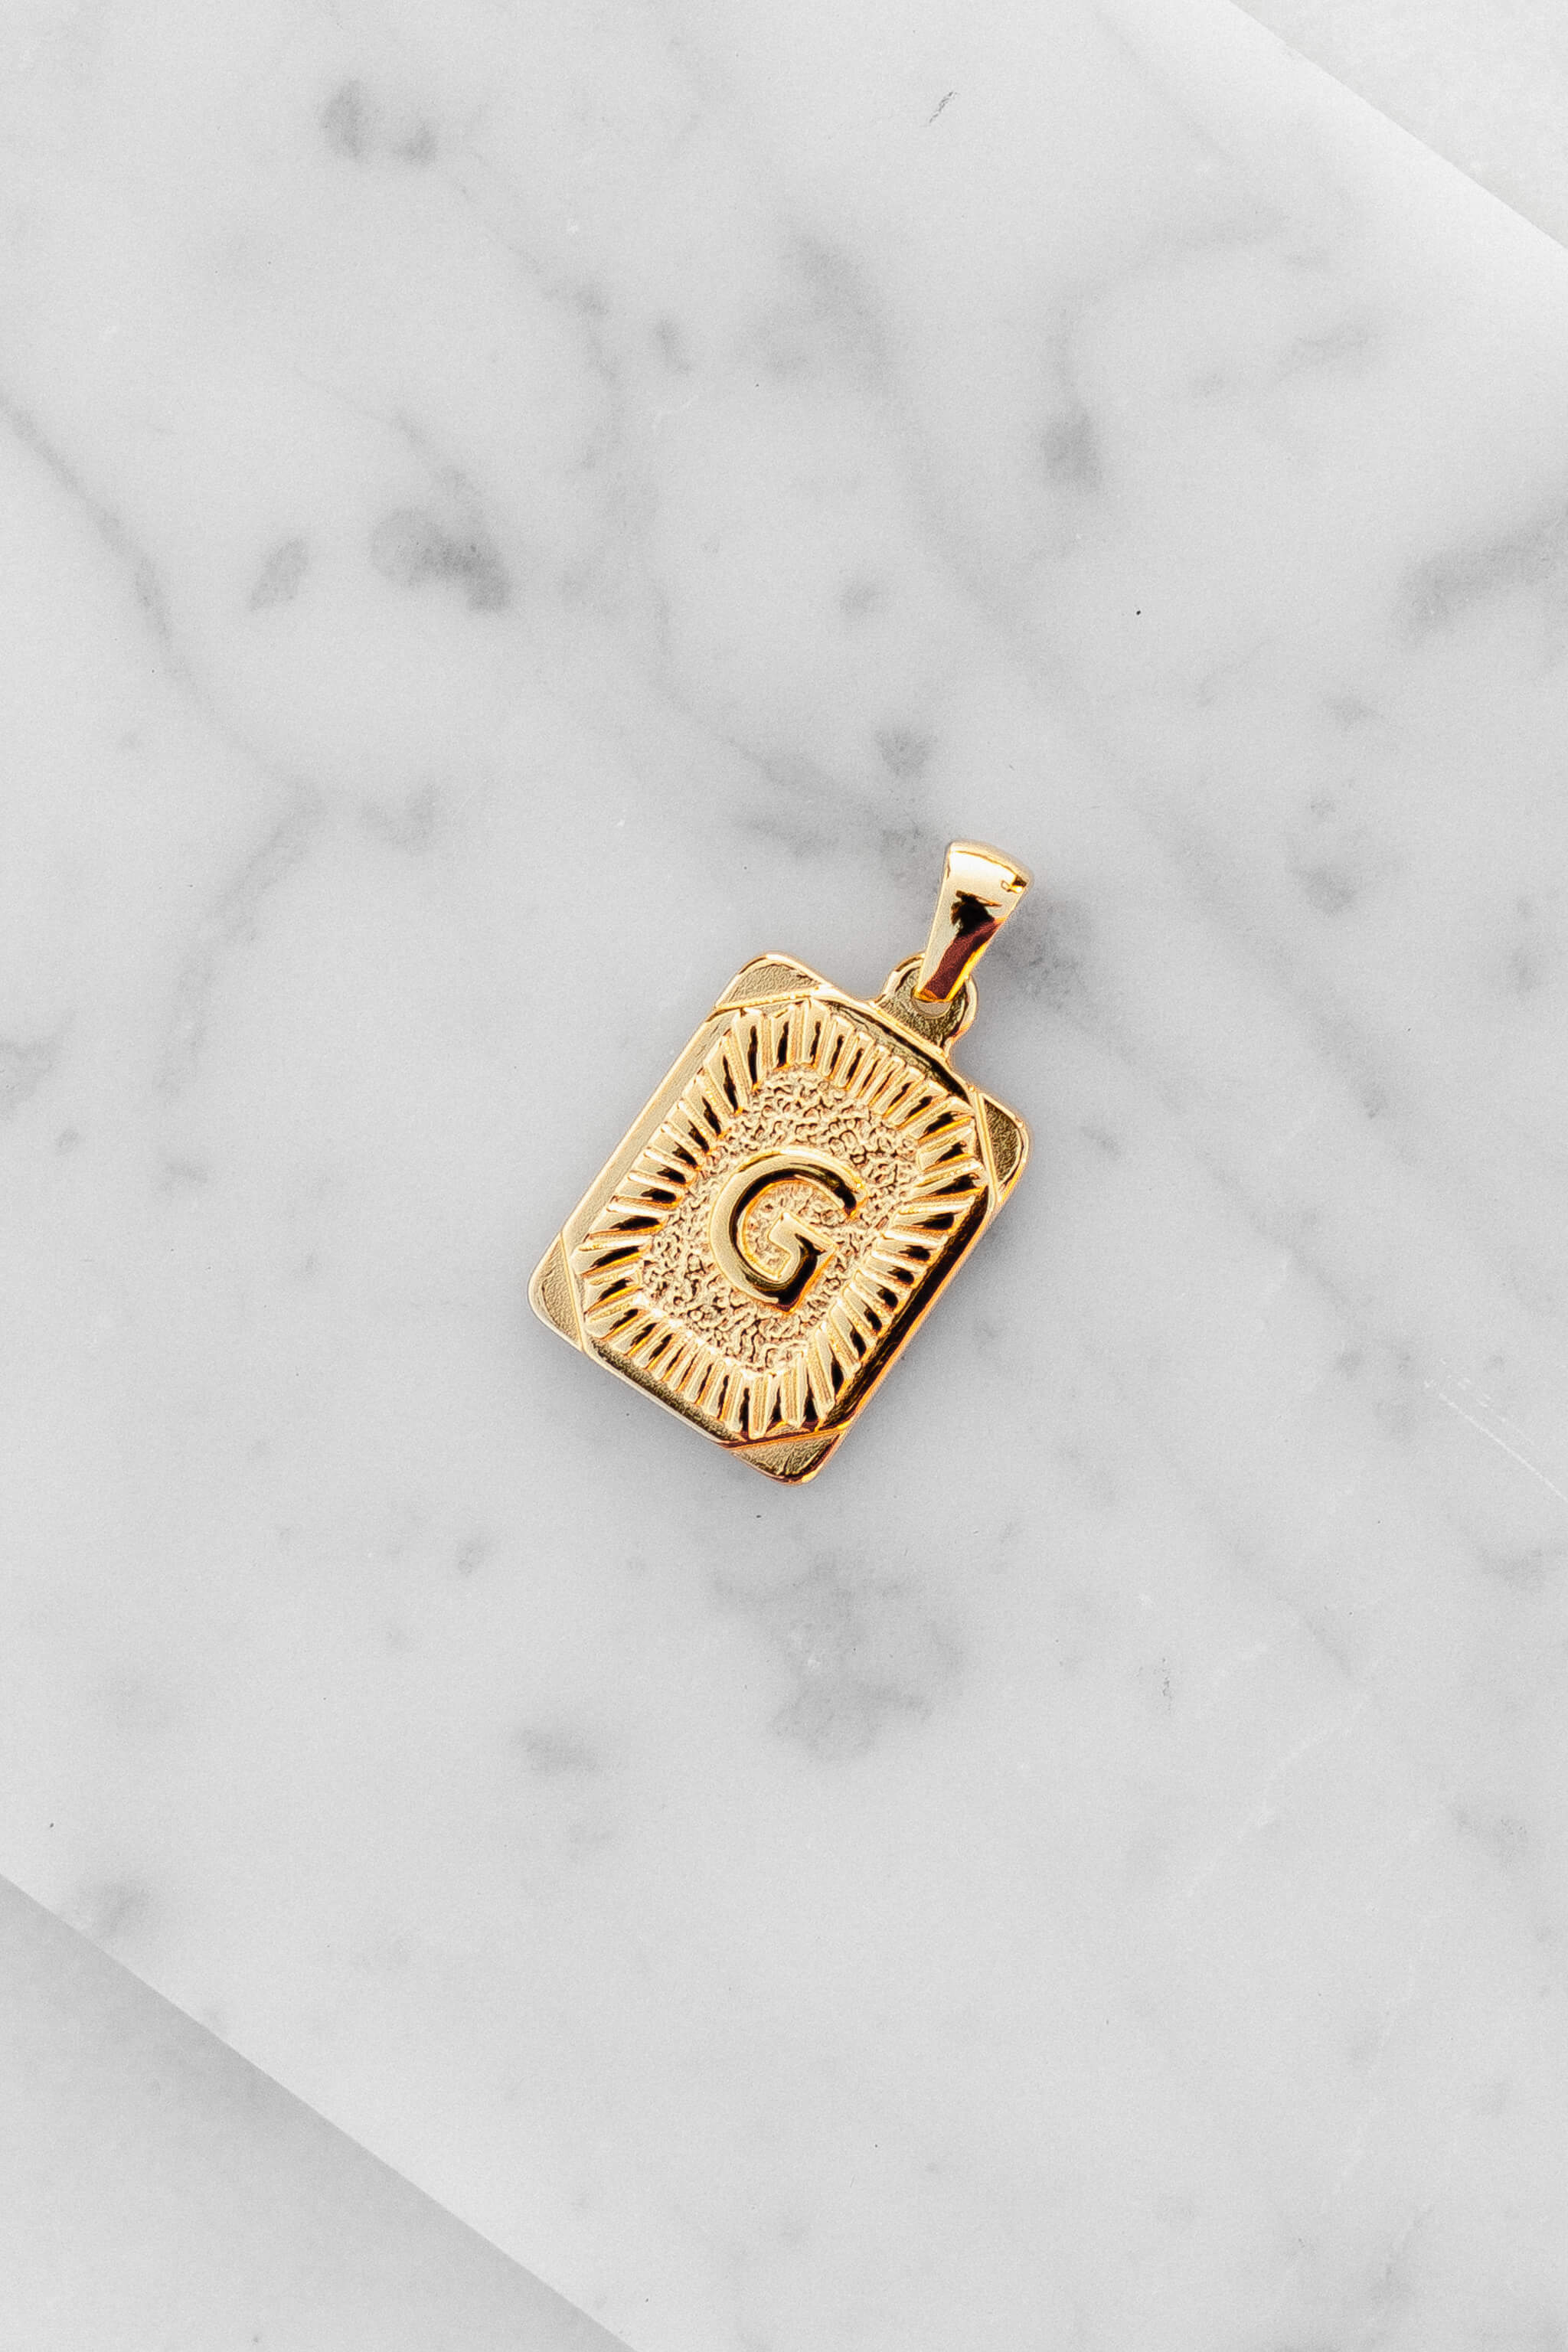 Gold Monogram Letter "G" Charm laying on a marble